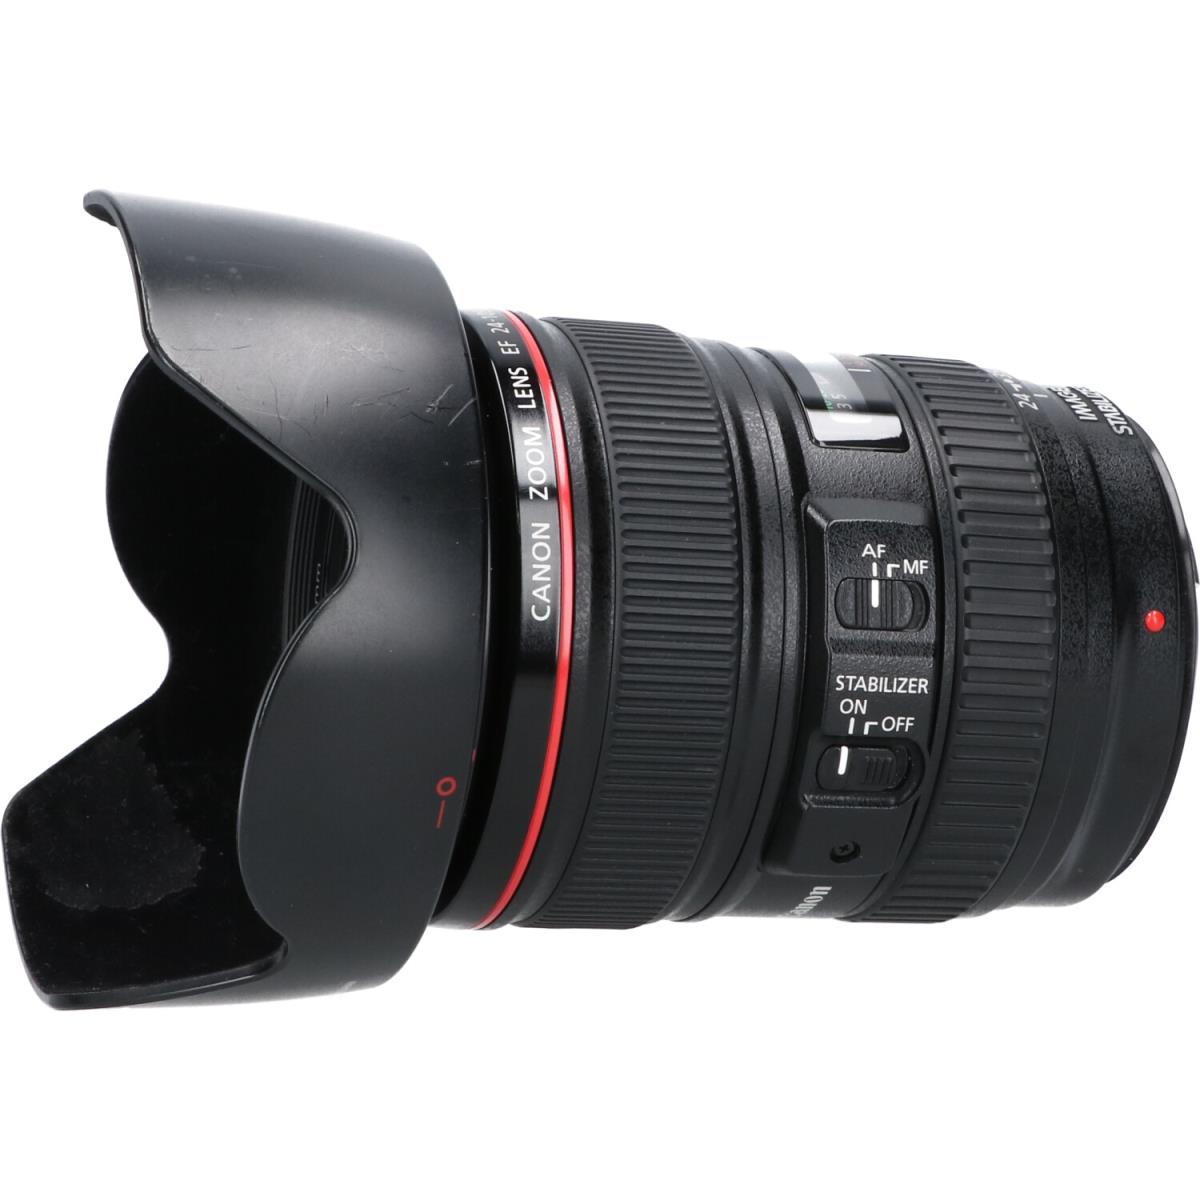 CANON EF24-105mm F4L IS USM